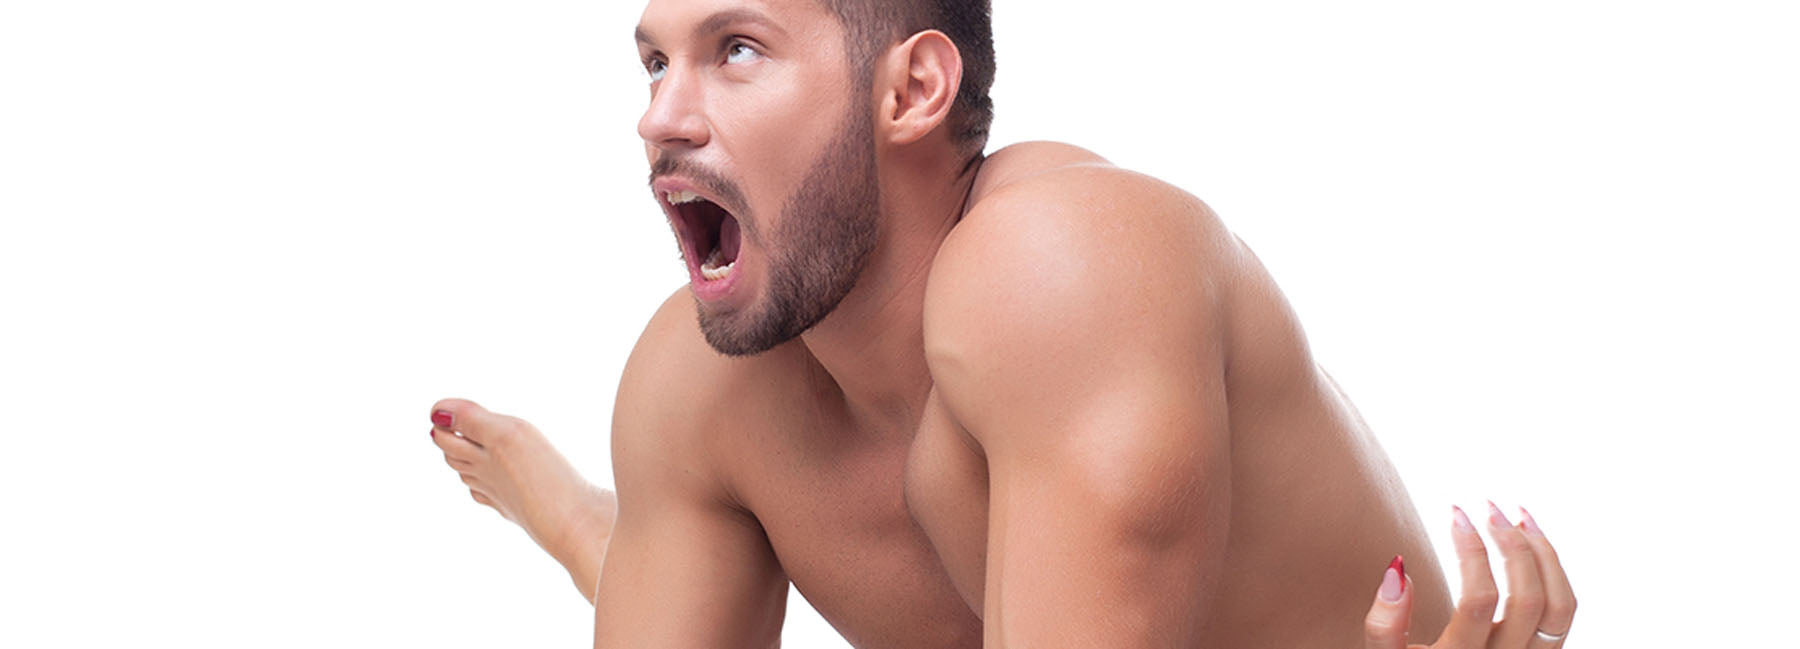 Male Orgasm: Get Loud and Proud